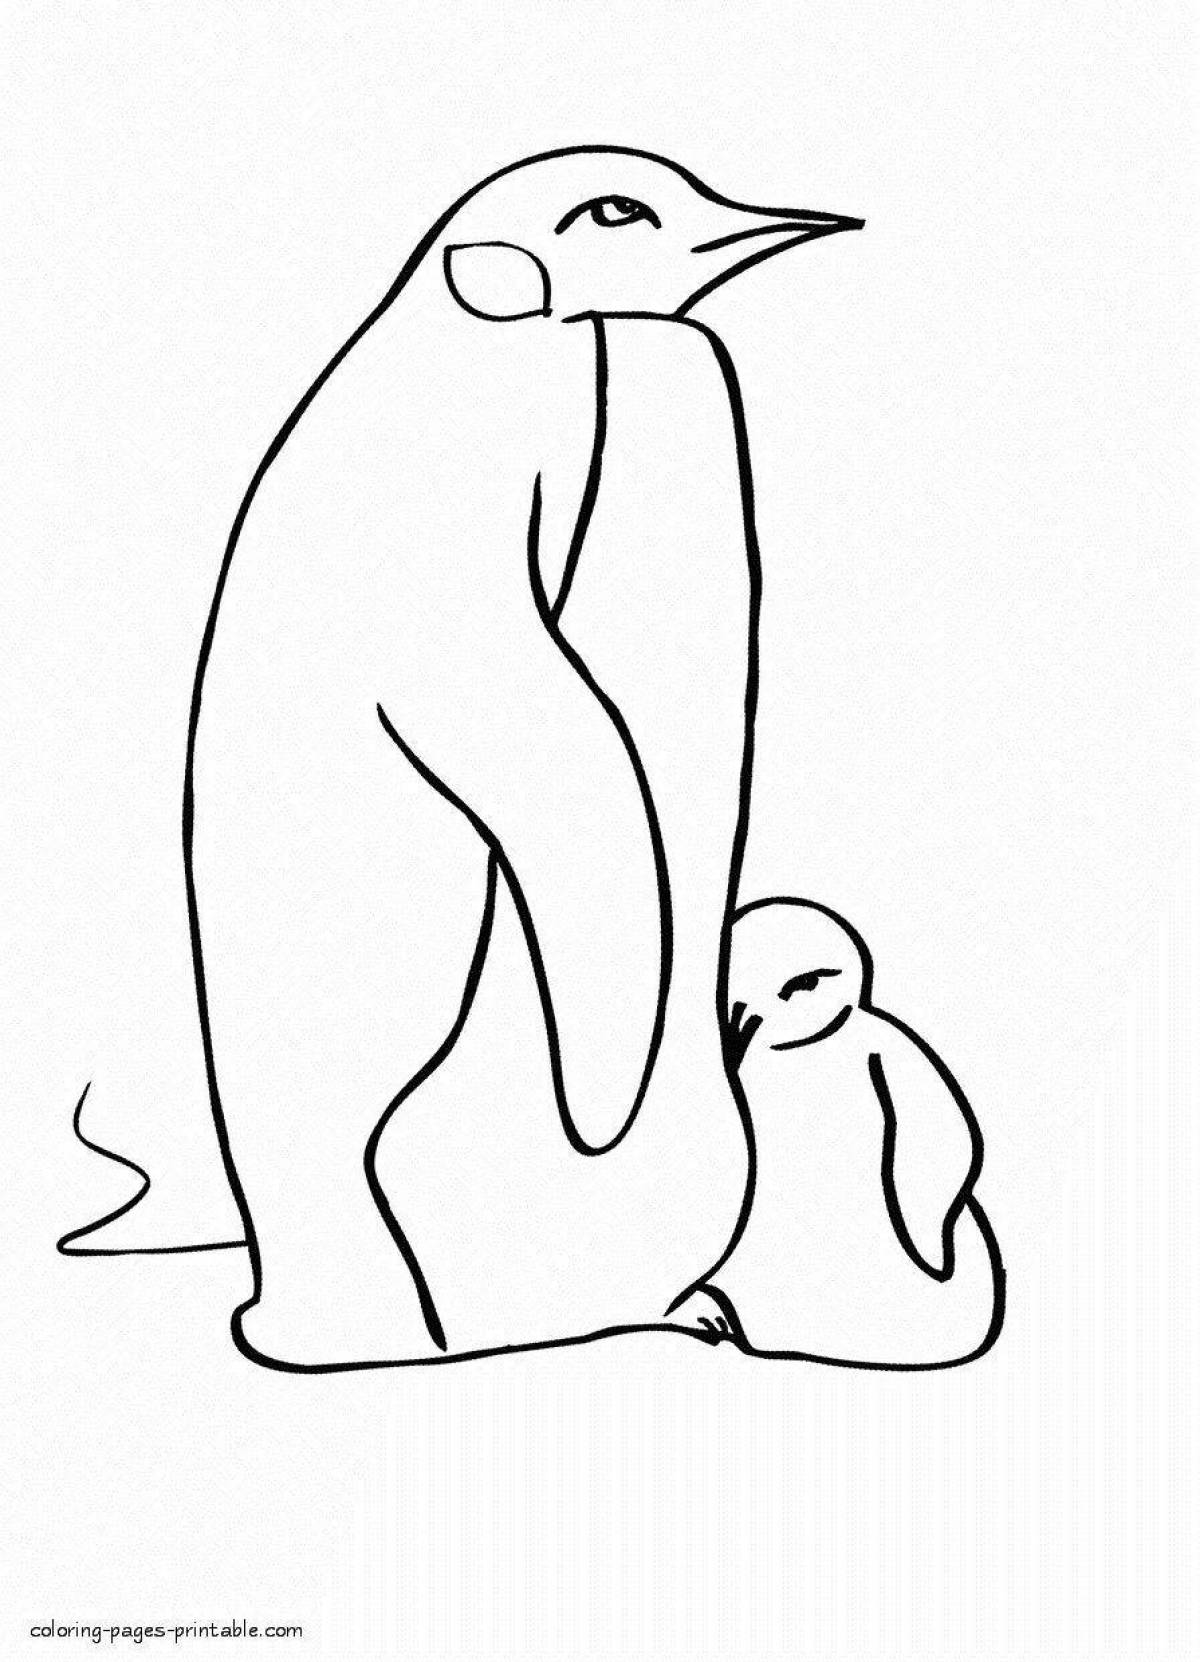 Coloring page gorgeous penguin and polar bear